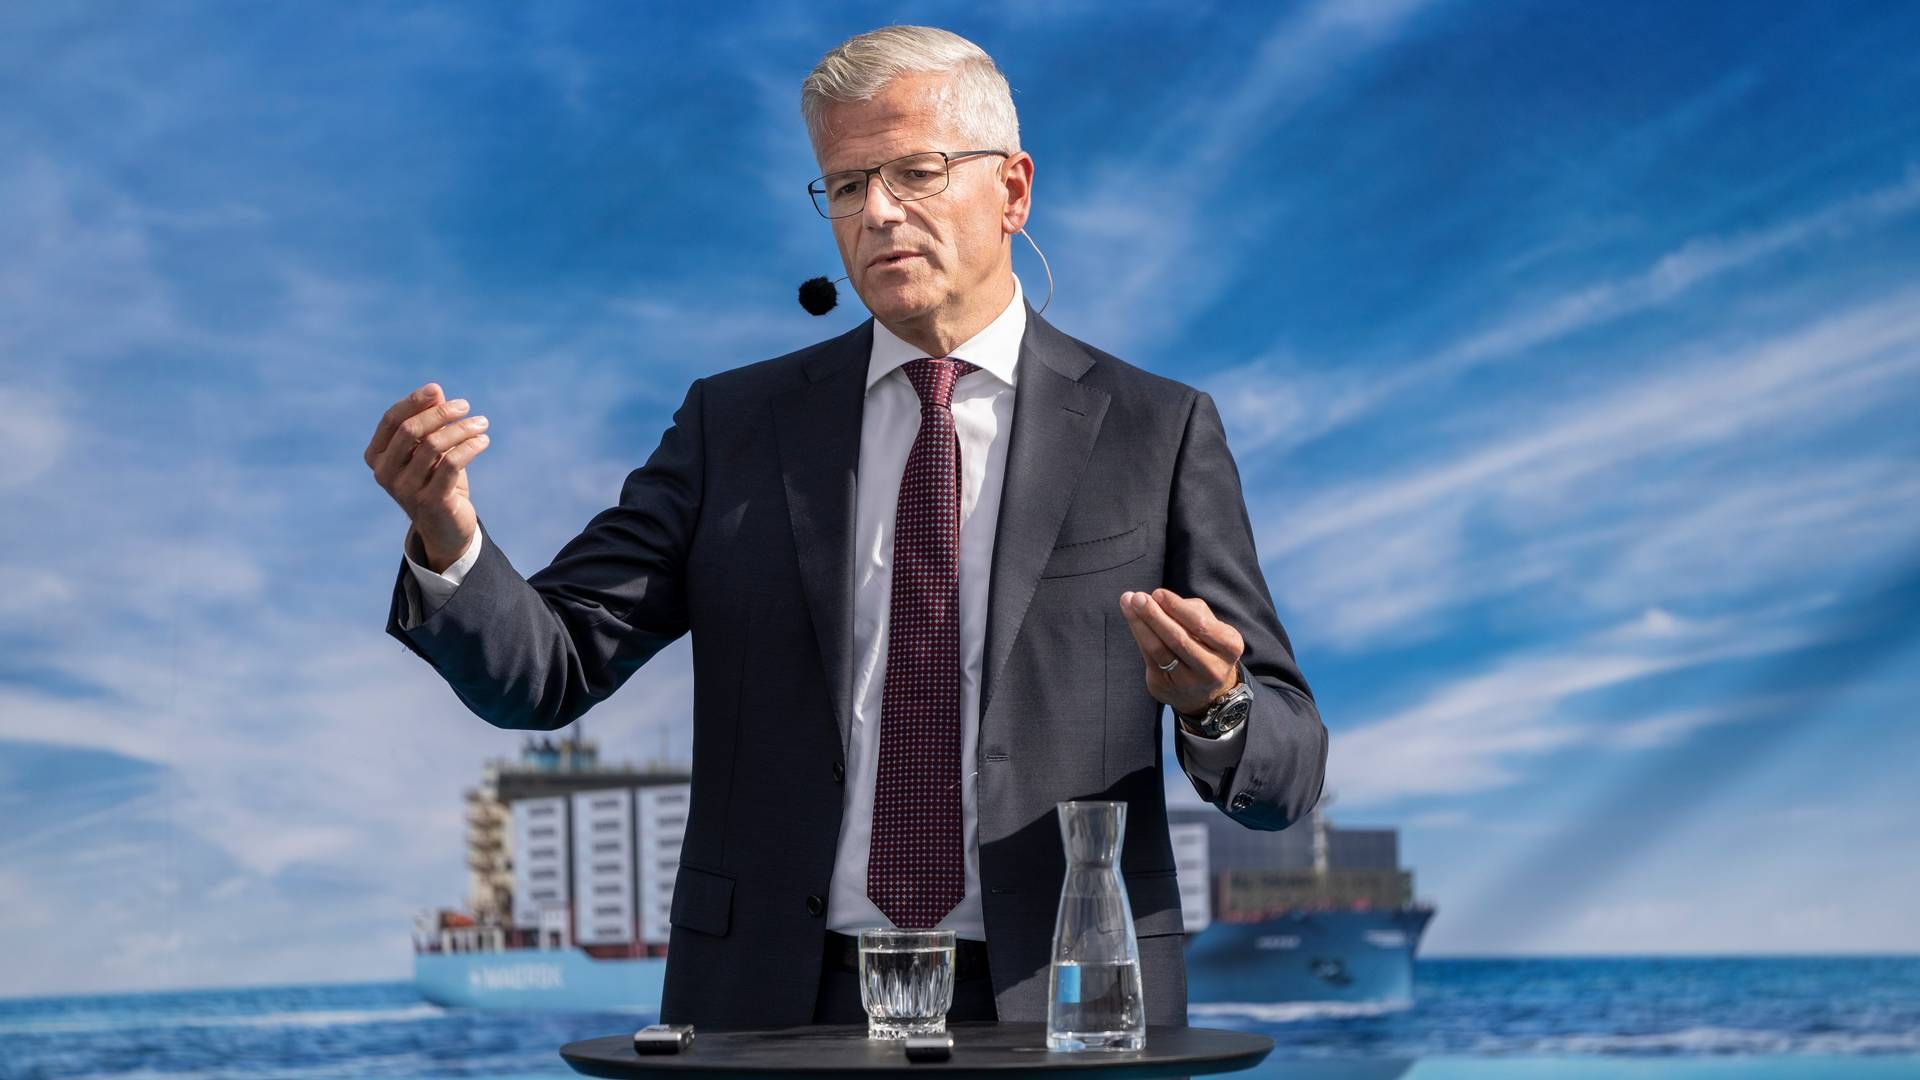 "It may be that in a few years we will order ammonia-powered ships when the technology is more mature," Vincent Clerc, CEO of Maersk, said at a press conference. | Photo: Mads Claus Rasmussen